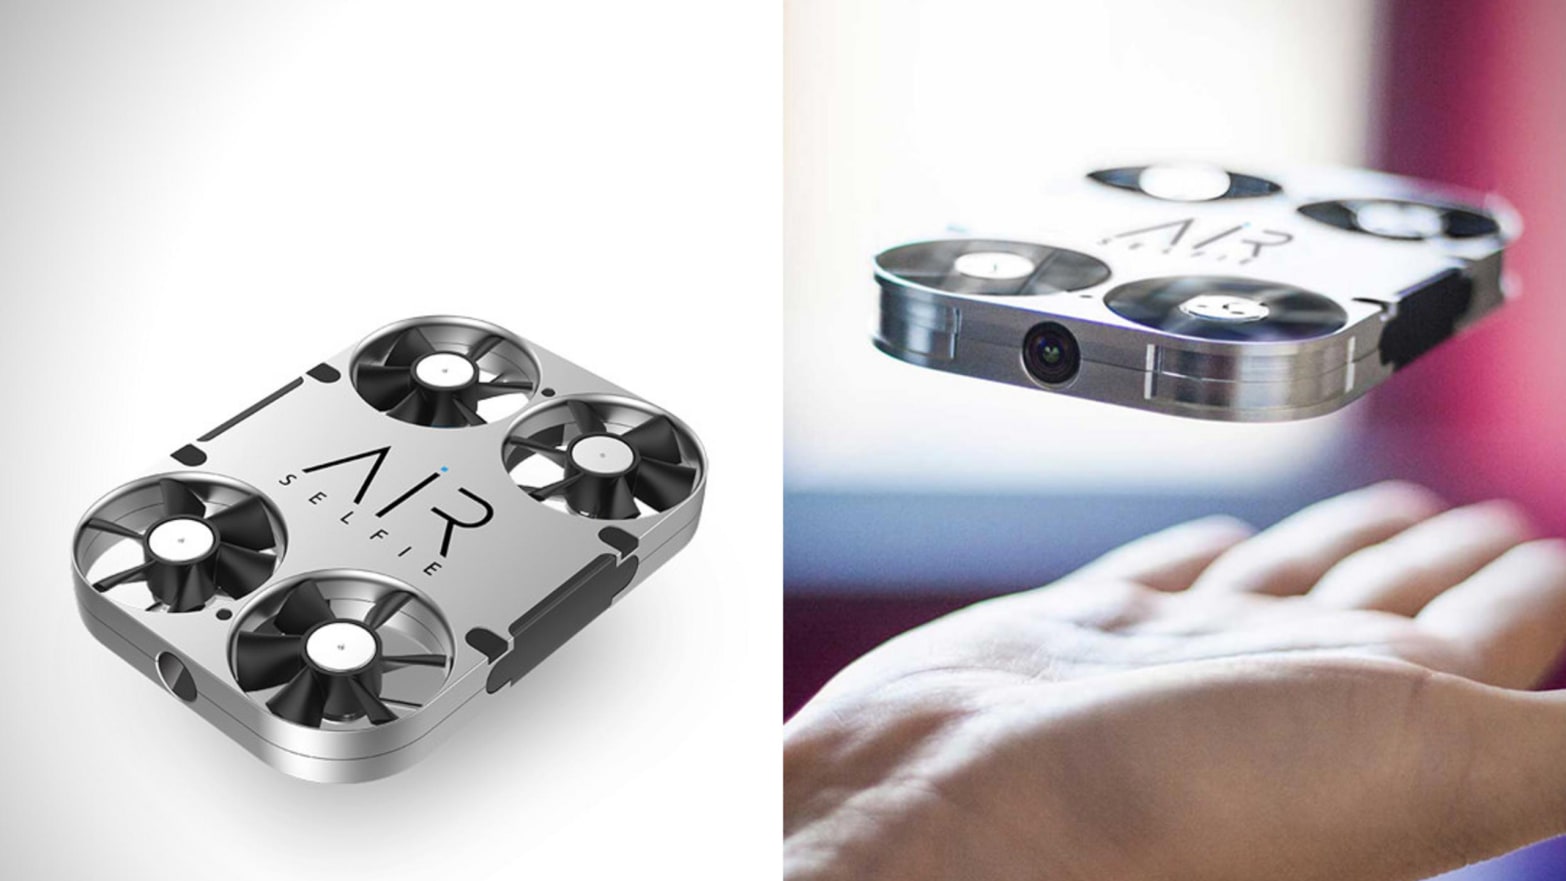 Take Better Wherever You Go With This Pocket-Sized Selfie Drone